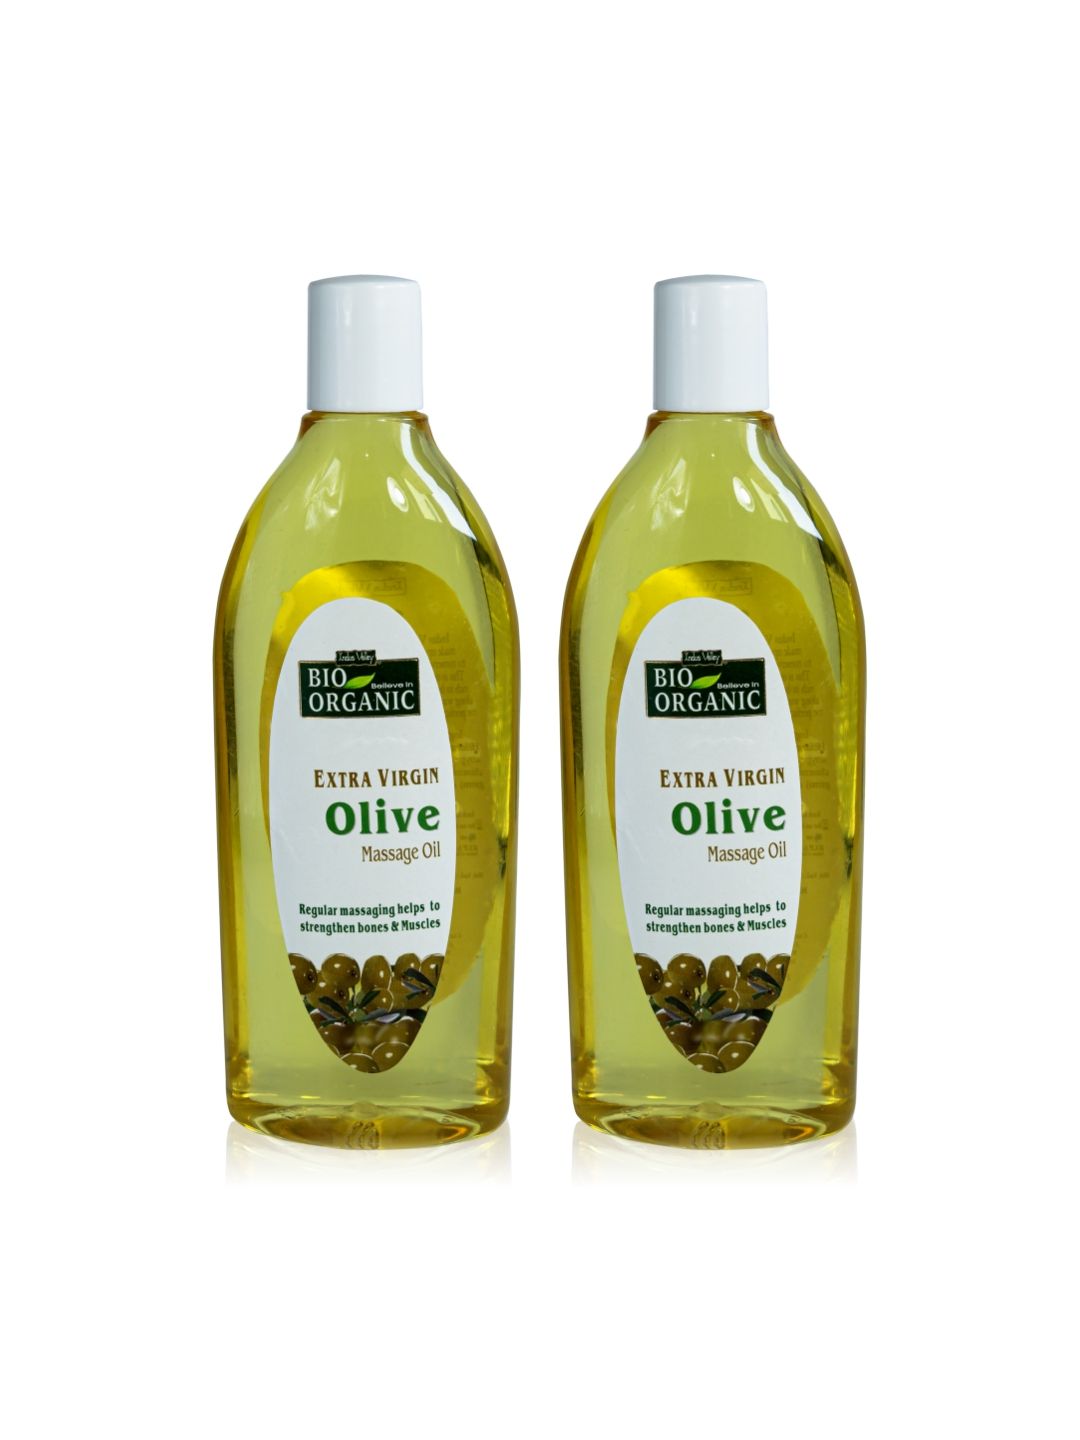 Indus Valley Pack of 2 Bio Organic Olive Massage Oil Price in India